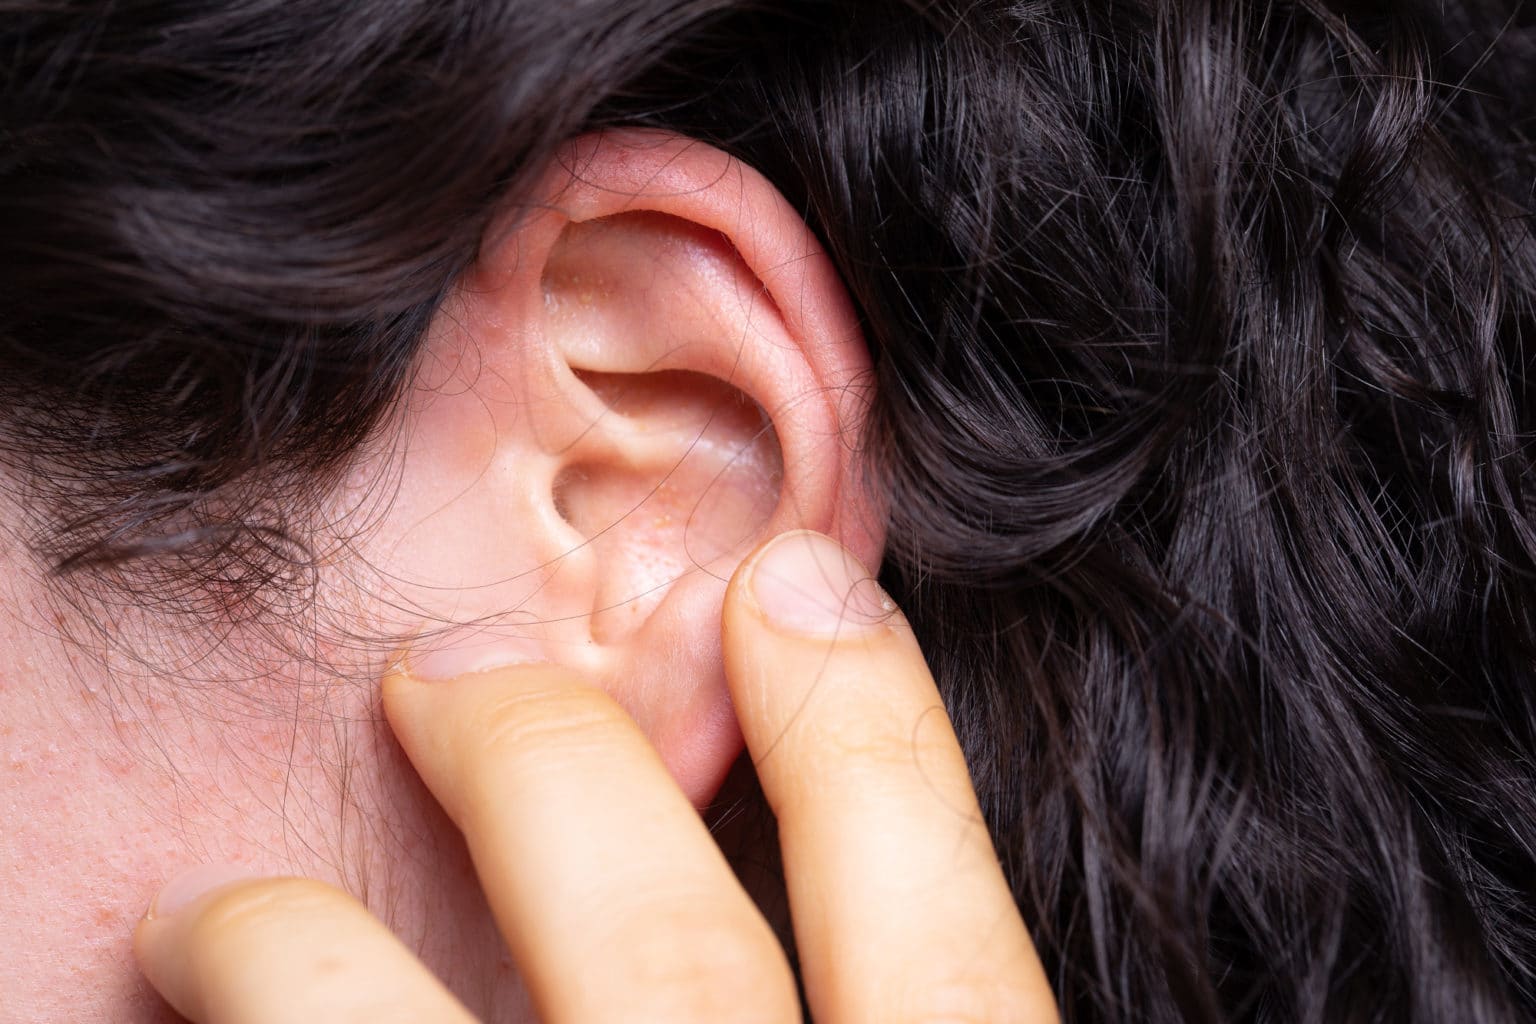 Pain Under Ears After Drinking Alcohol